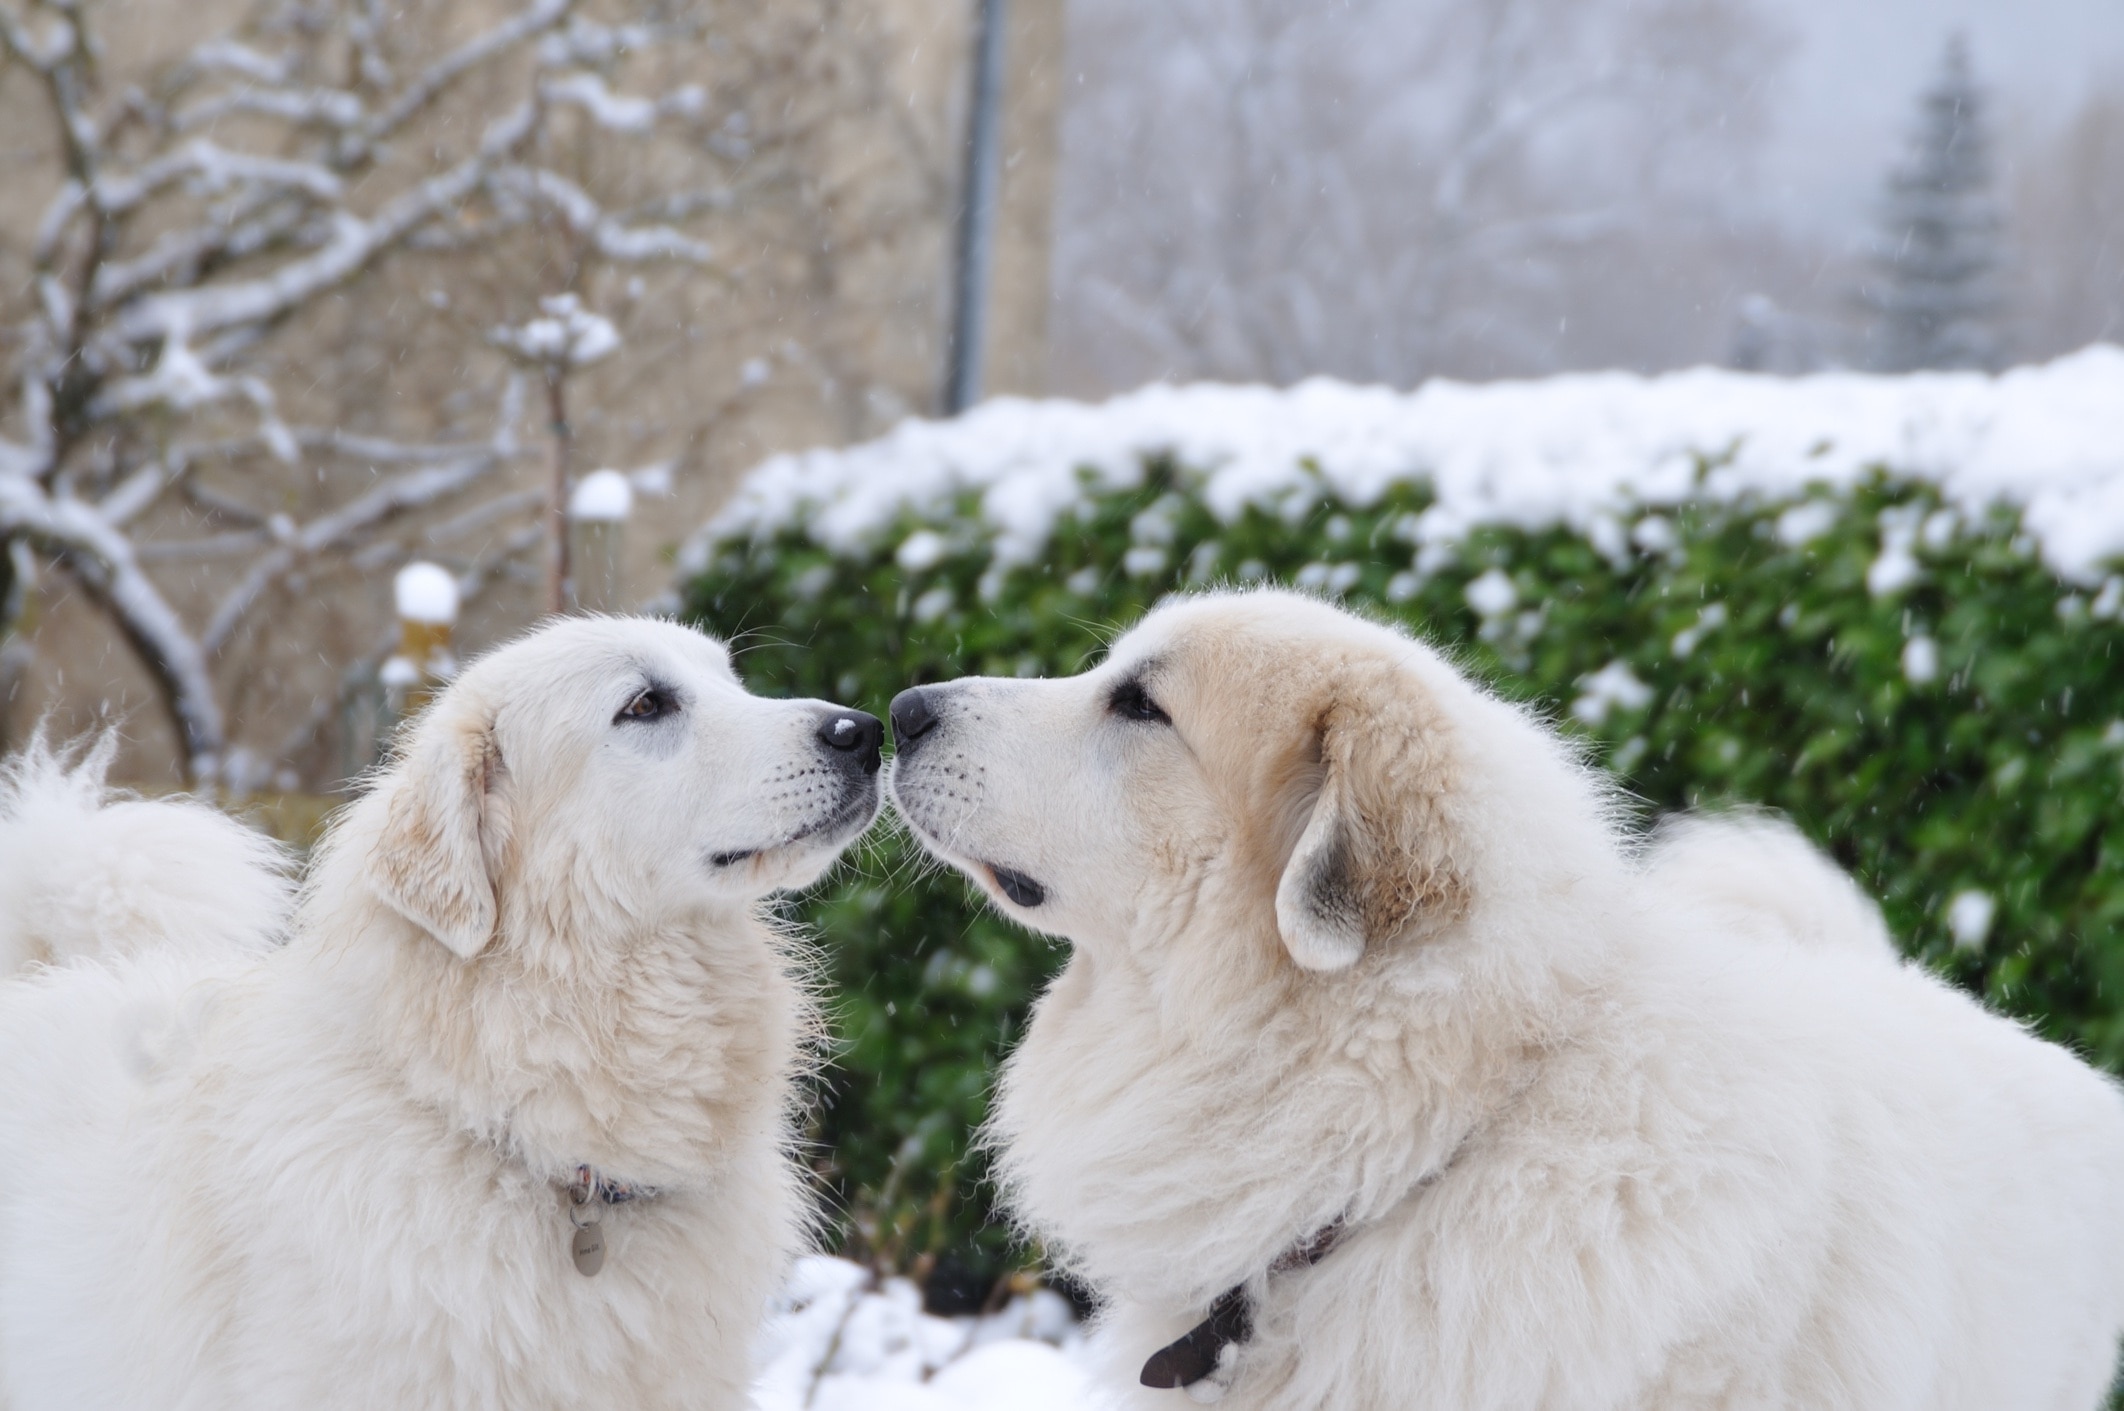 Two Great Pyrenees dogs touching noses.